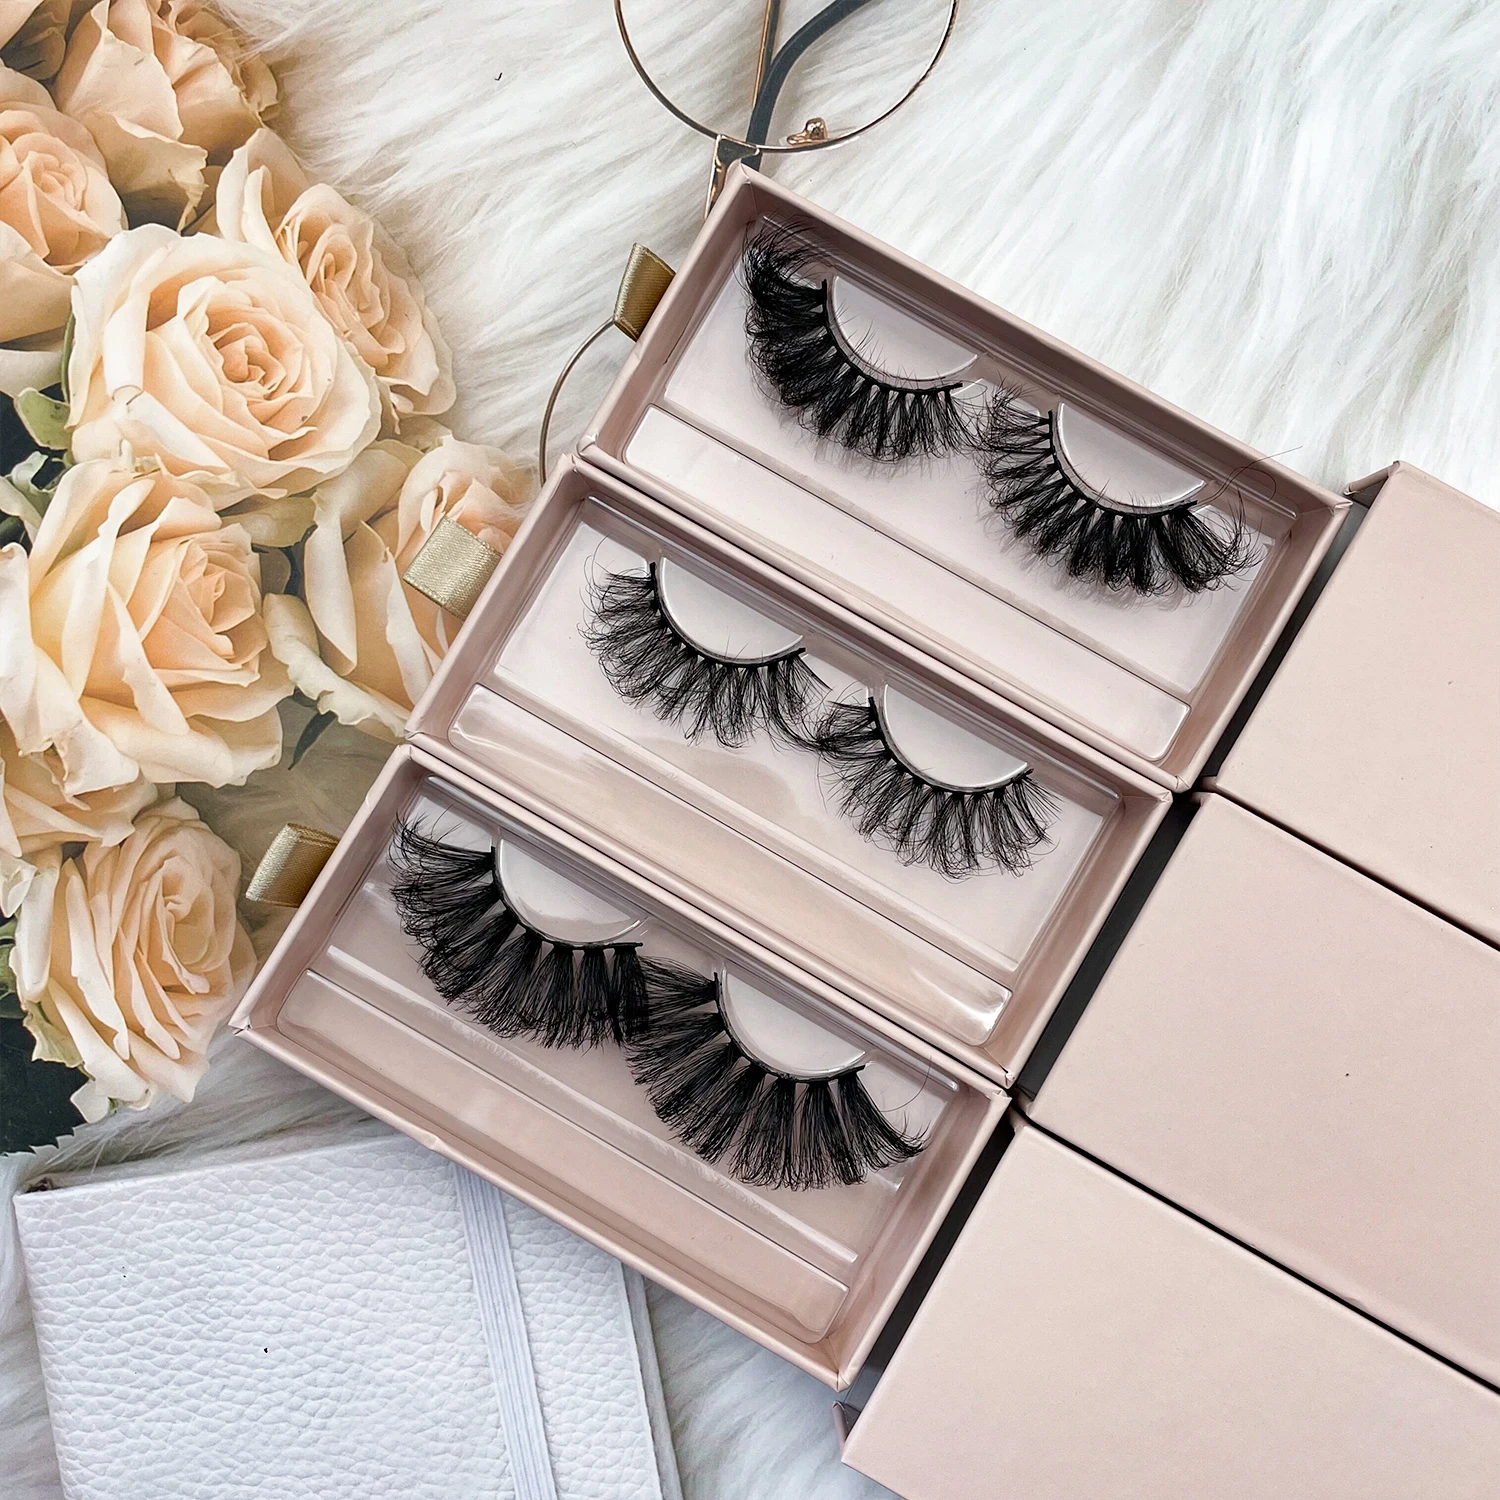 

Wholesale customized lashes box private brand 25mm mink eyelash vendor 3D mink eyelashes wholesale with nude lashbox packaging